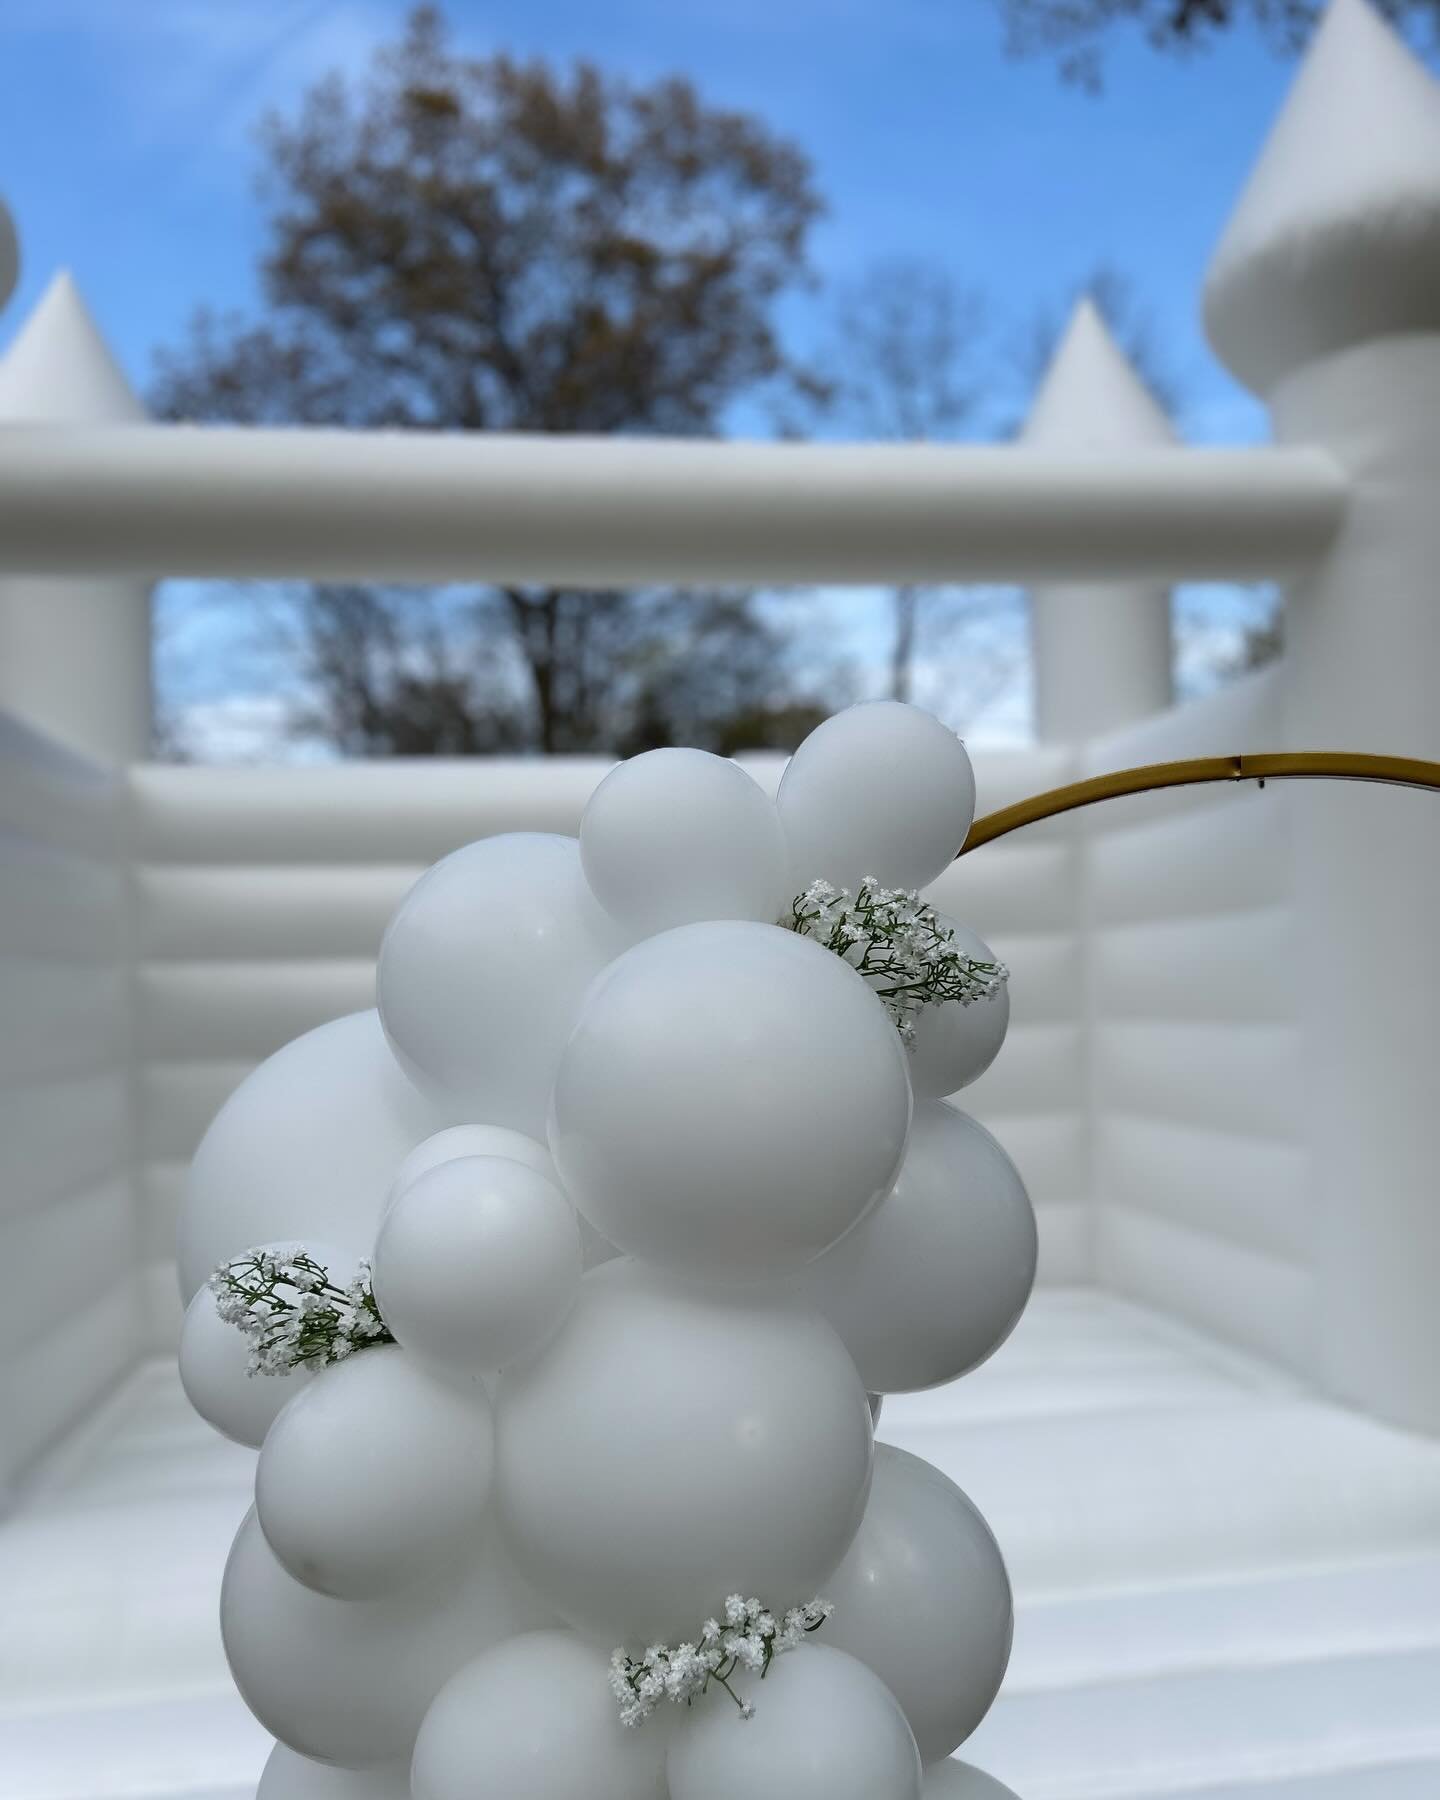 Communion and baptism season is coming up and we have availability! Our white bounce houses + simple, elegant balloons will make the perfect decor 🤍🕊️ Message us to inquire!